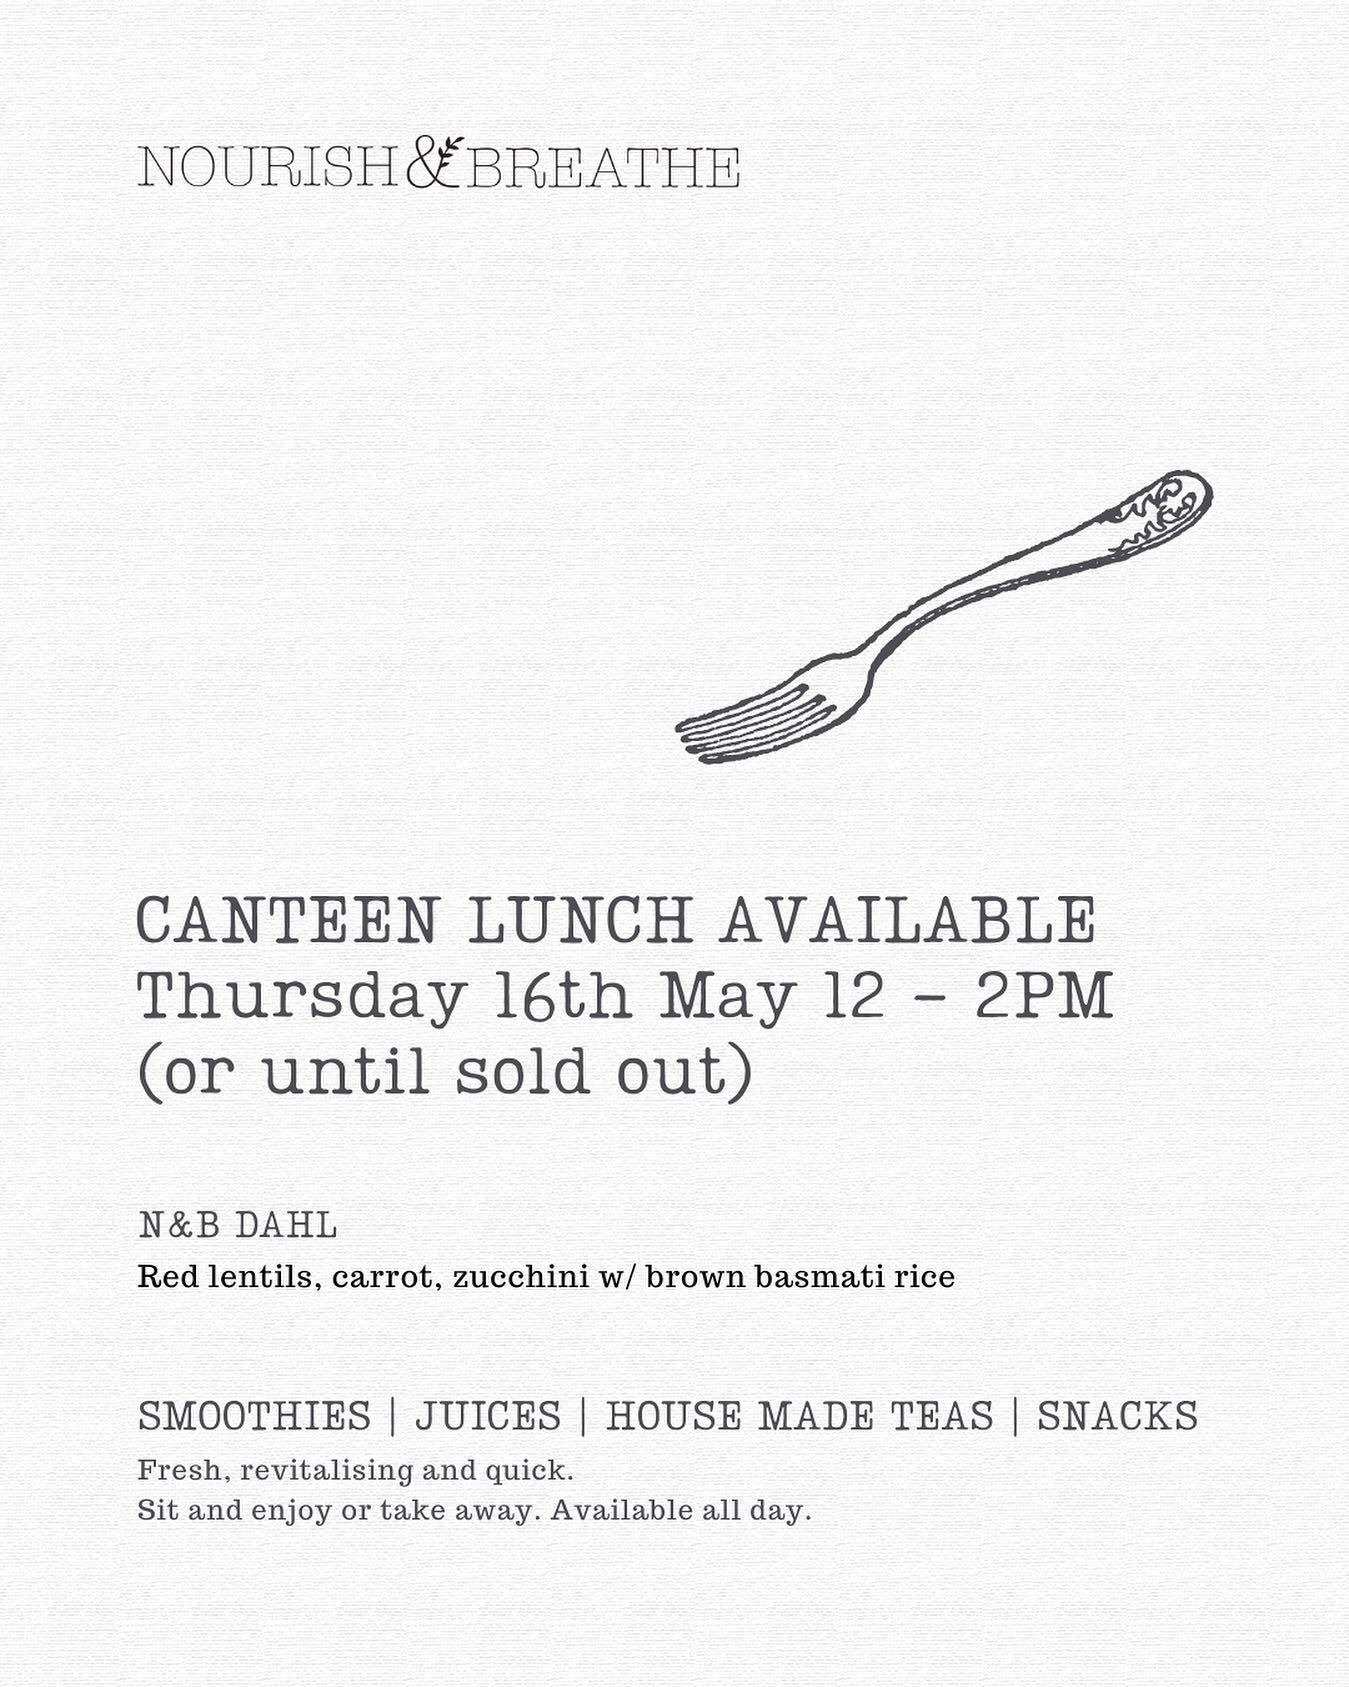 🍴N&amp;B Lunch
Thursday 16th May 12-2pm
(Or until sold out)

Dahl w/ brown basmati and broccolini

Drop by for your nourishing weekly lunch 

@dairy_road 

#nourishandbreathe #nourish #canberrafood #wholefoods #dahl